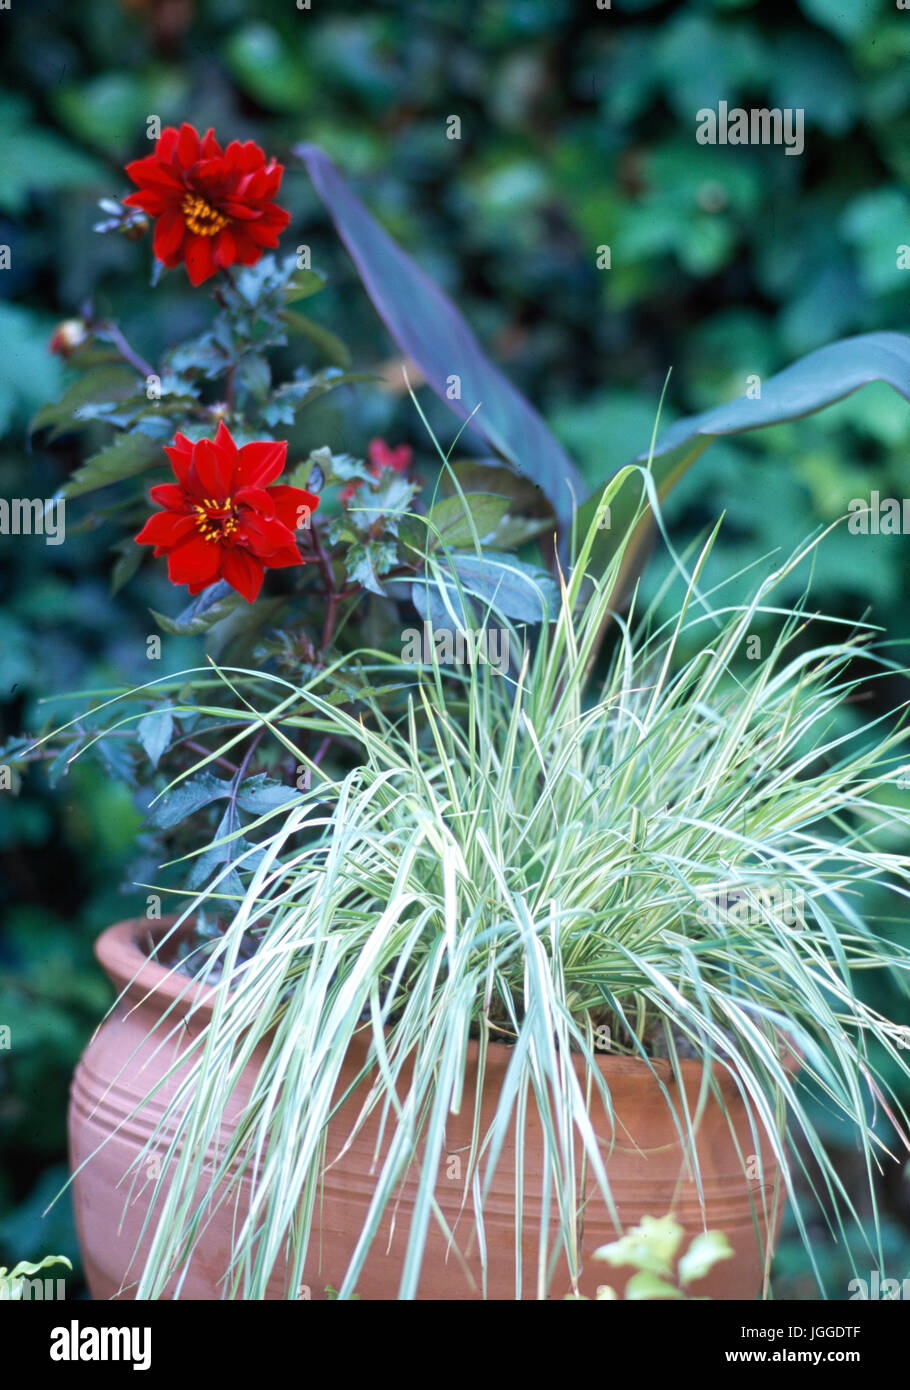 Grasses in terracotta pot with red dahlia Stock Photo